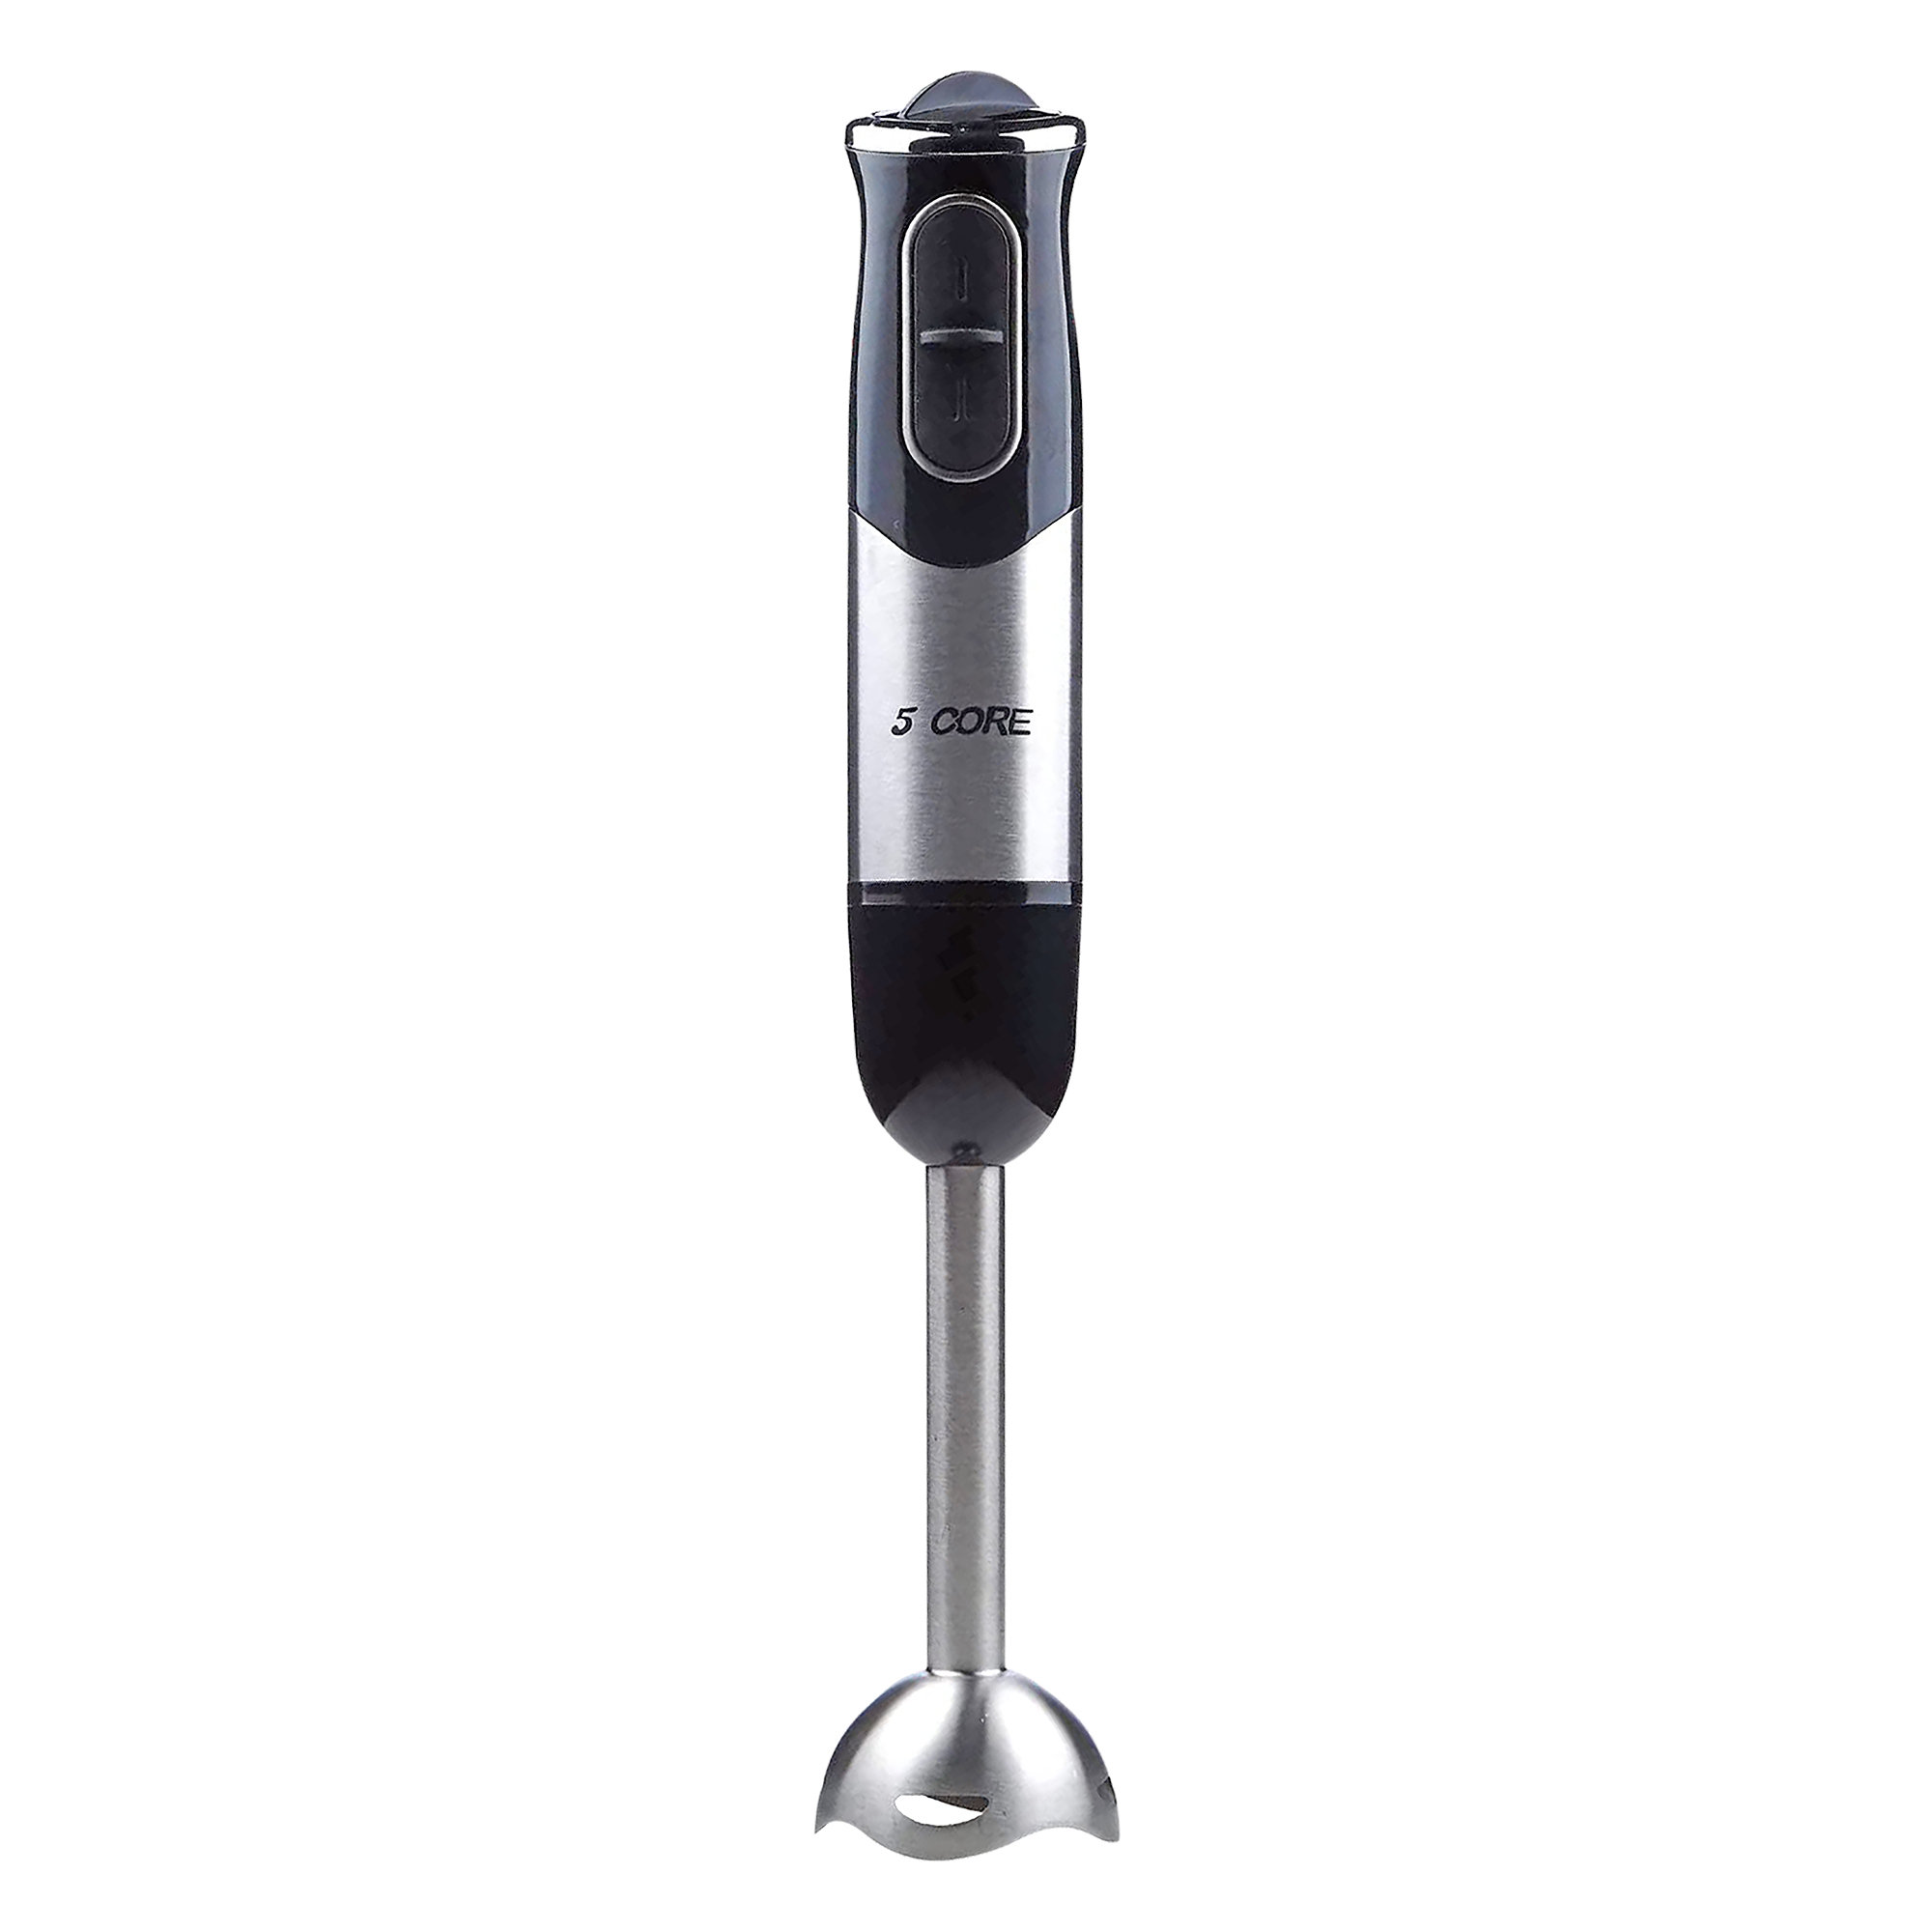 5 Core Motor Stainless Blades, Wayfair Blender 500W HB Hand 1510 High-Performance with | Steel